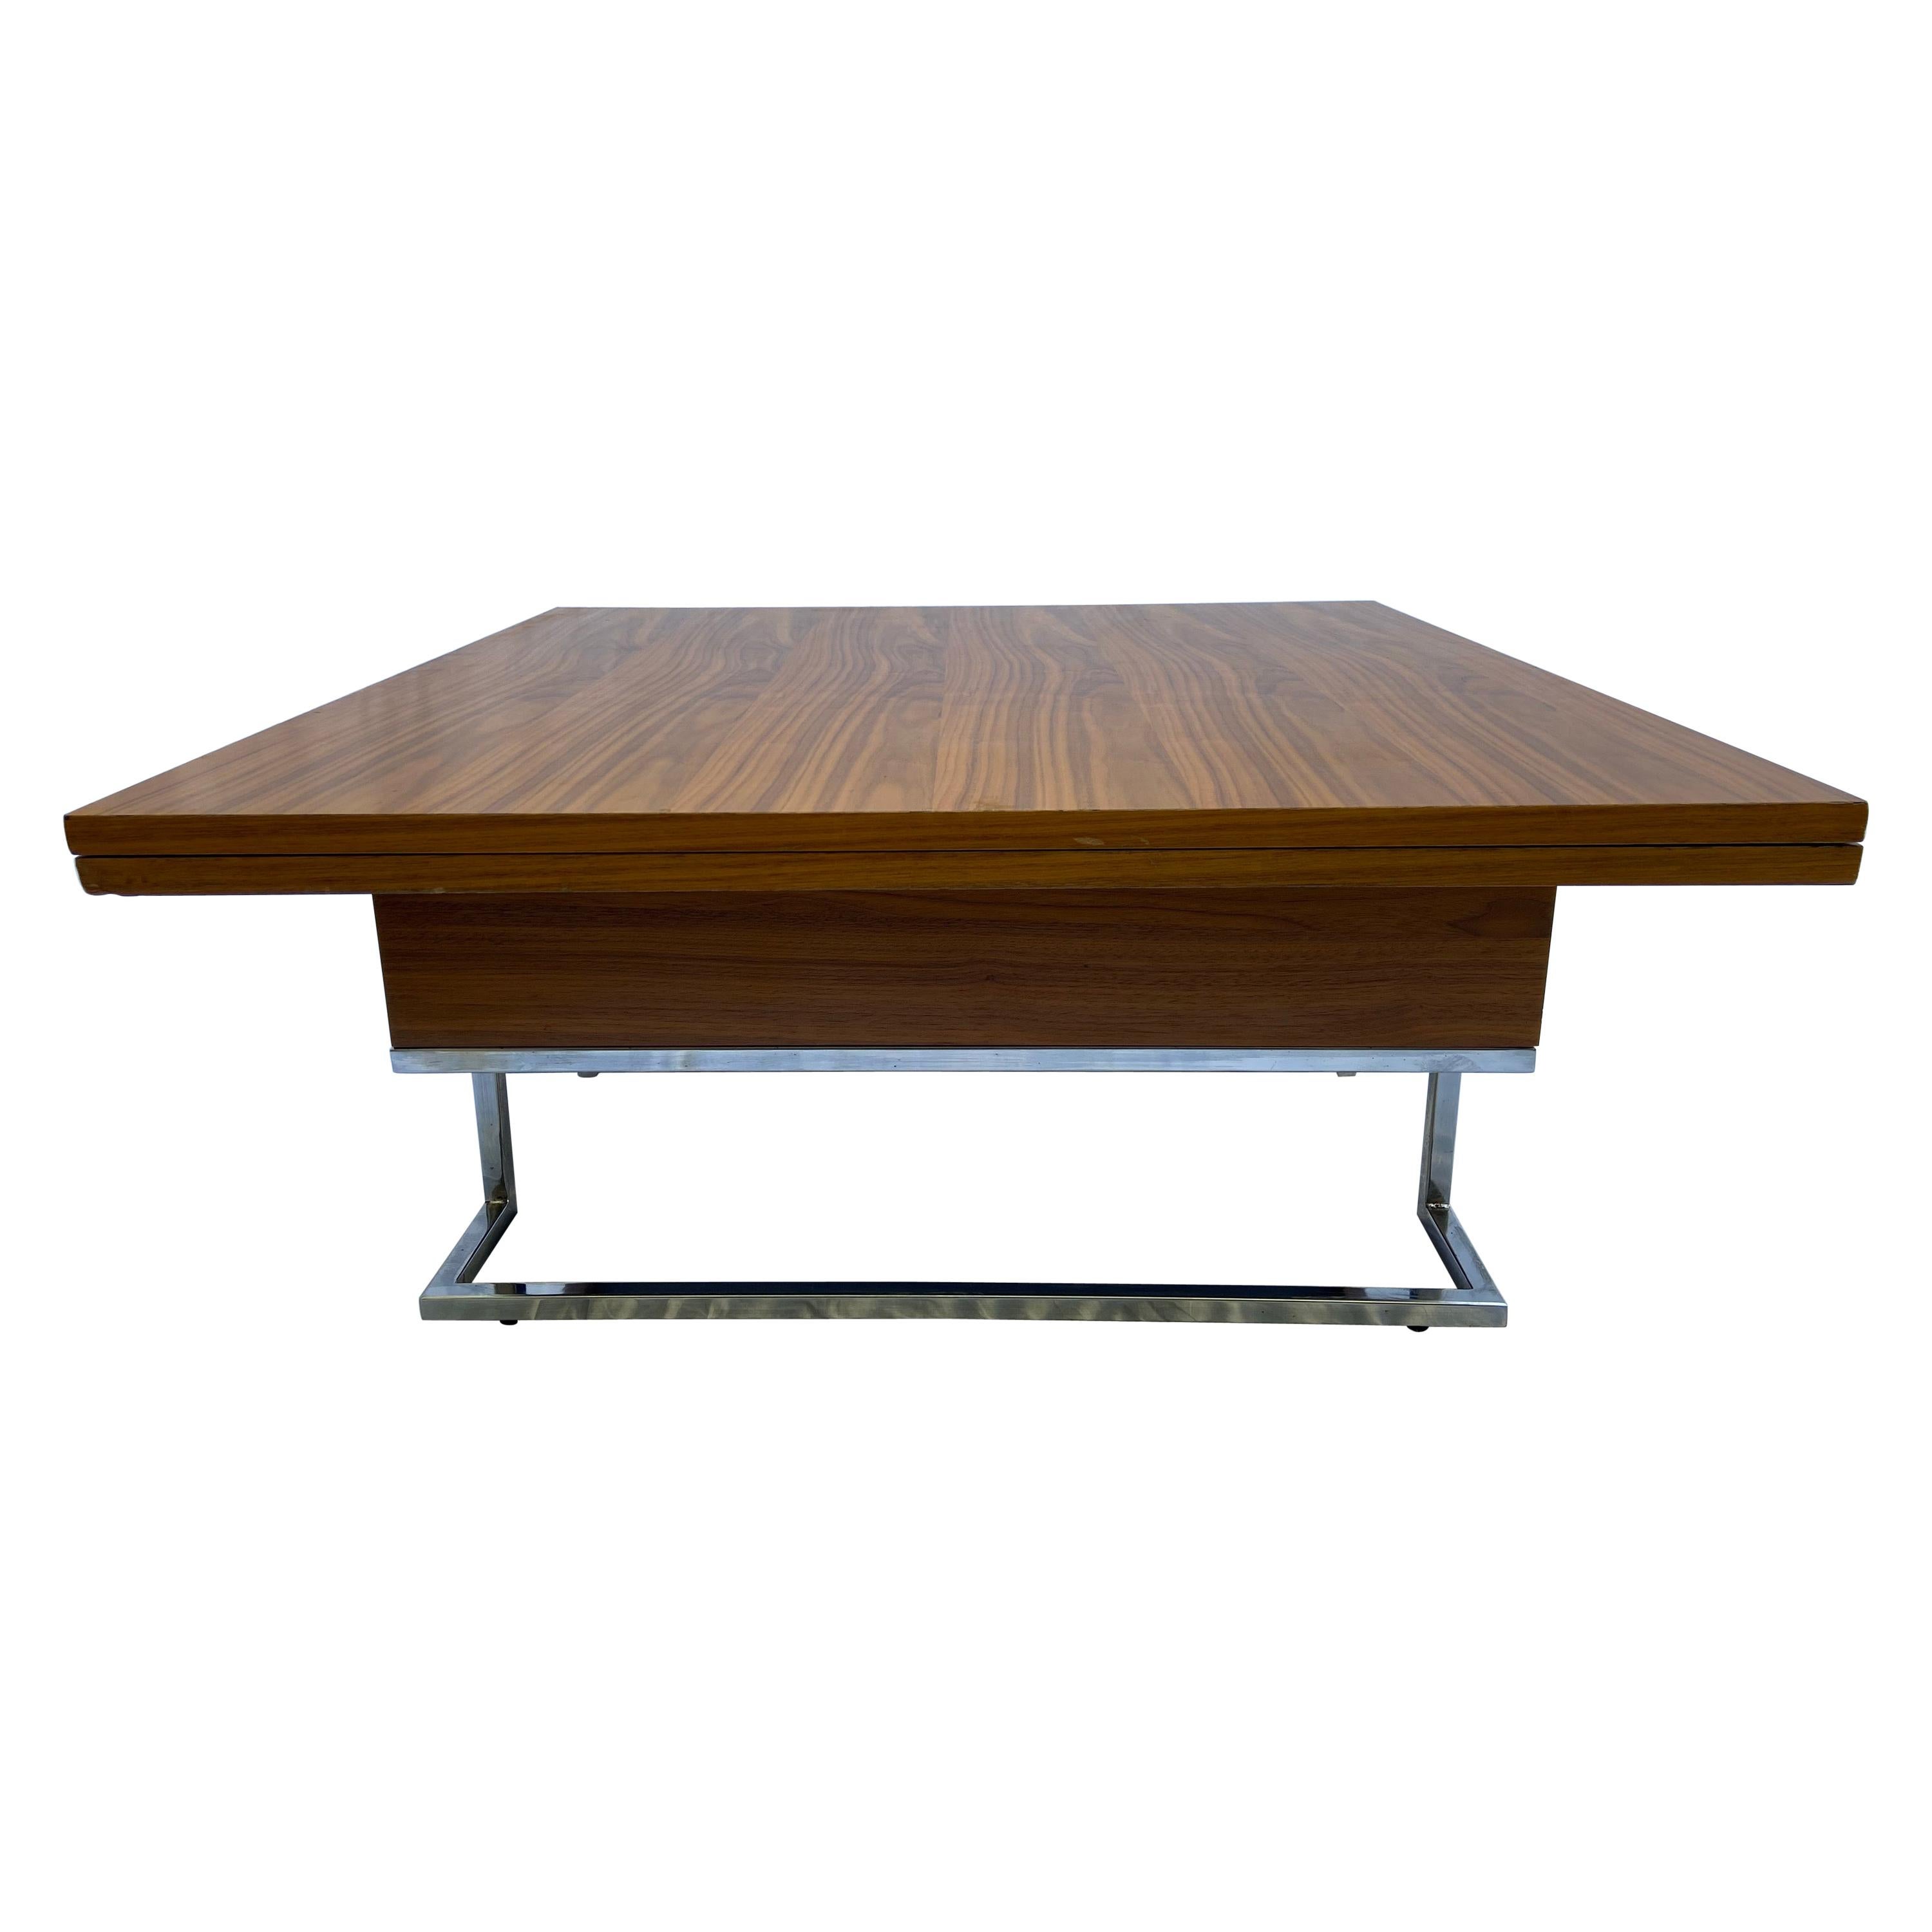 Modular Coffee Table / Dining Table - French Work, circa 1970